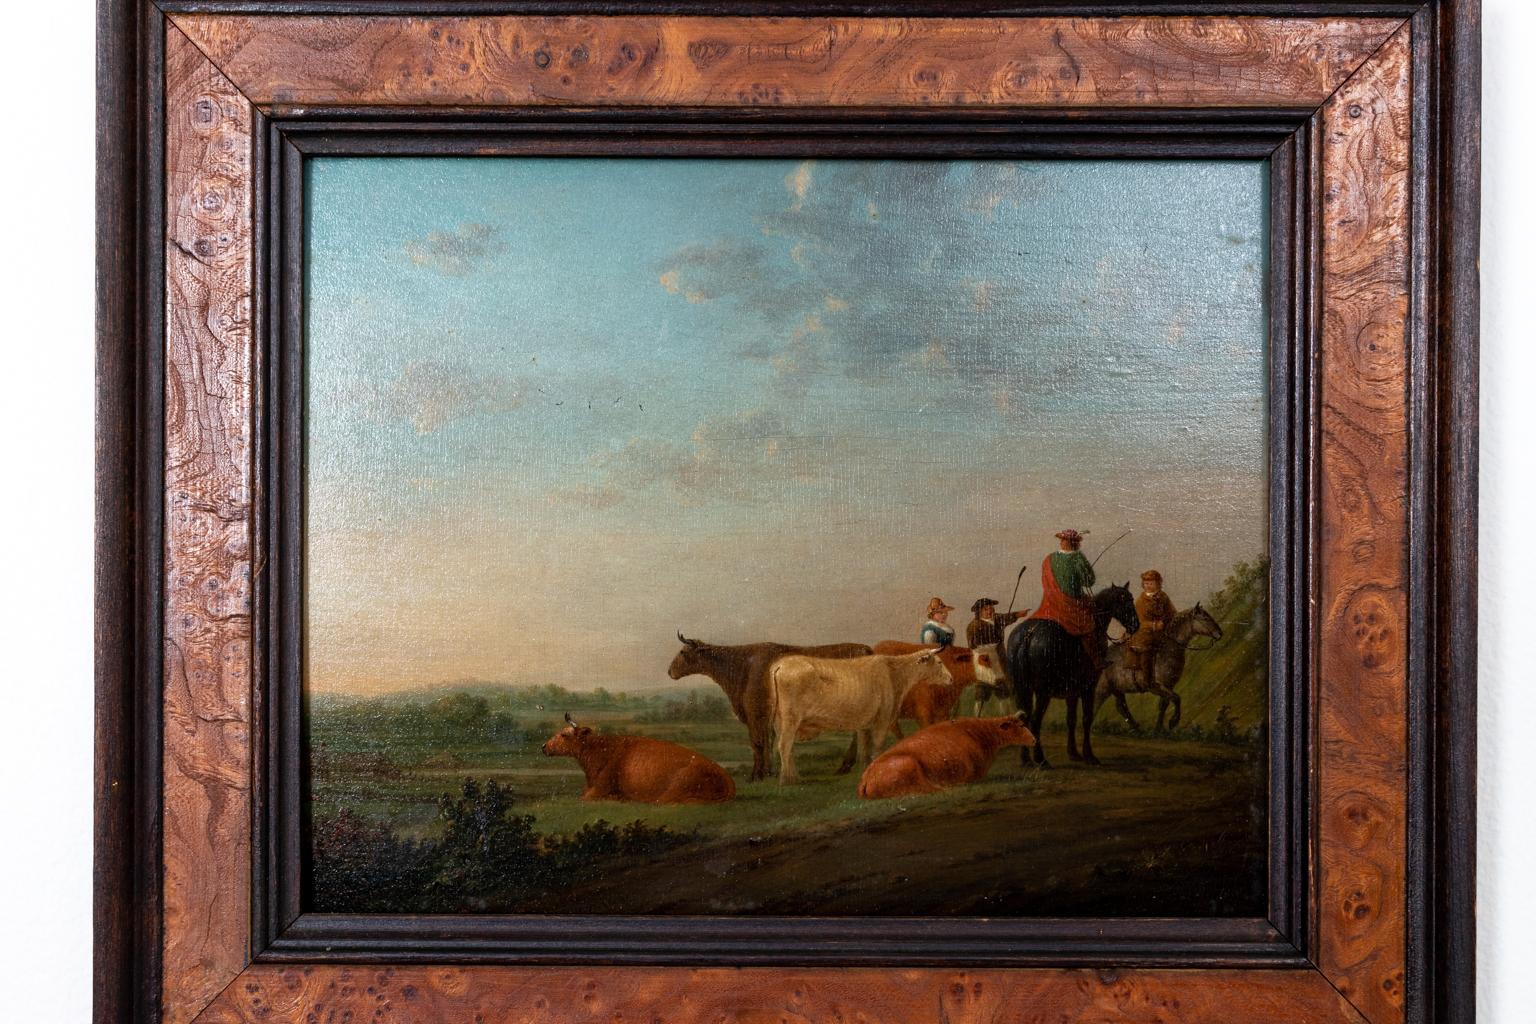 European Landscape Oil on Board with Cows